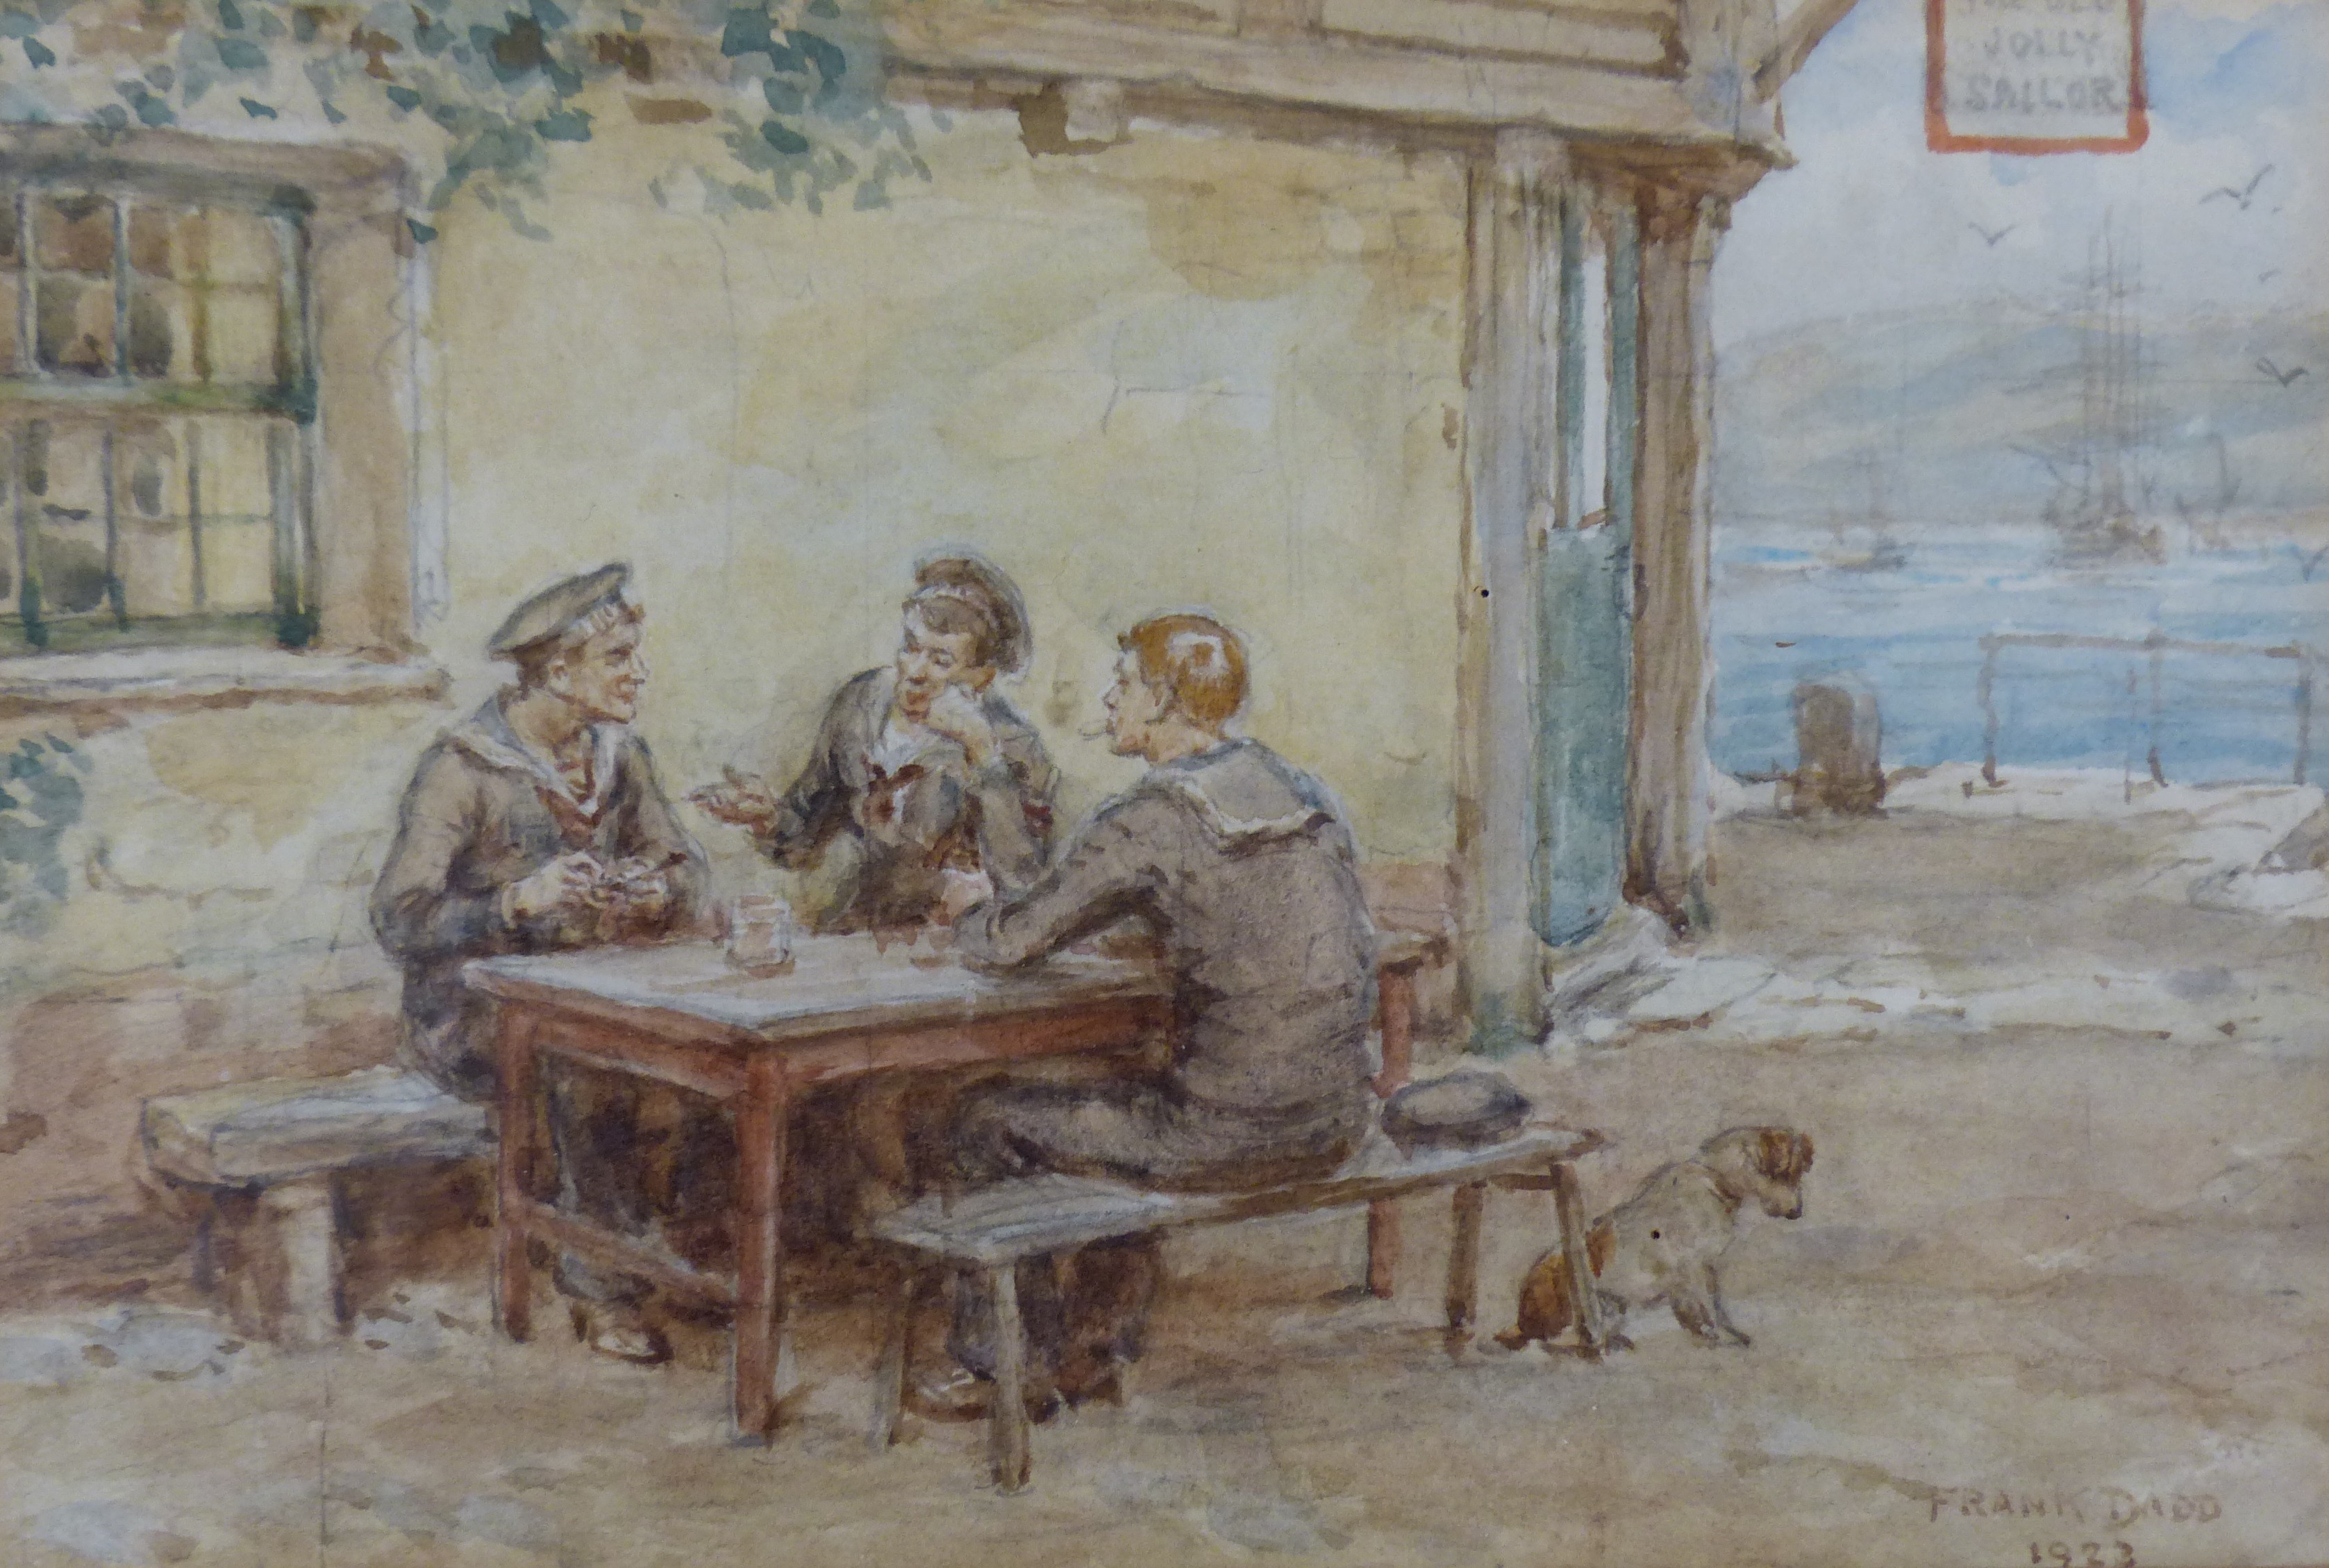 Frank Dadd (1851-1929), watercolour, Sailors outside The Old Jolly Sailor, signed and dated 1923,